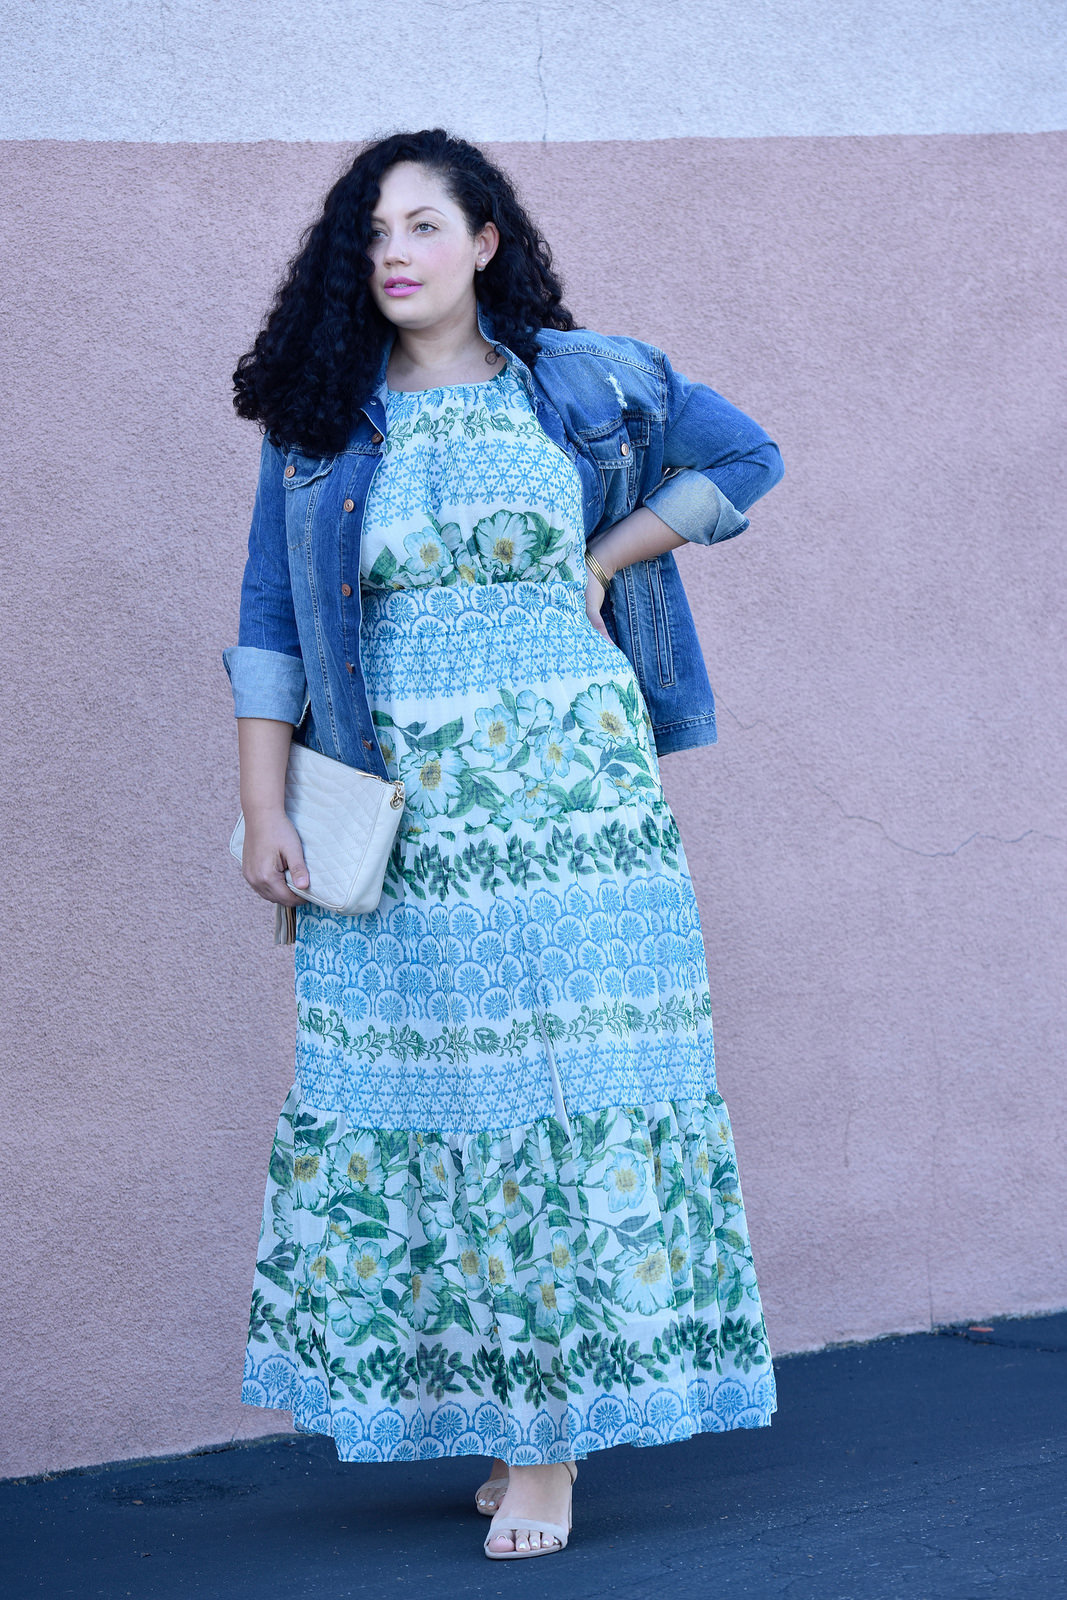 Plus size Maxi Dress by Eliza J, Bag from BCBG, Shoes by Nordstorm, Love Lorn Lipstick by Mac, and Denim Jacket via @girlwithcurves